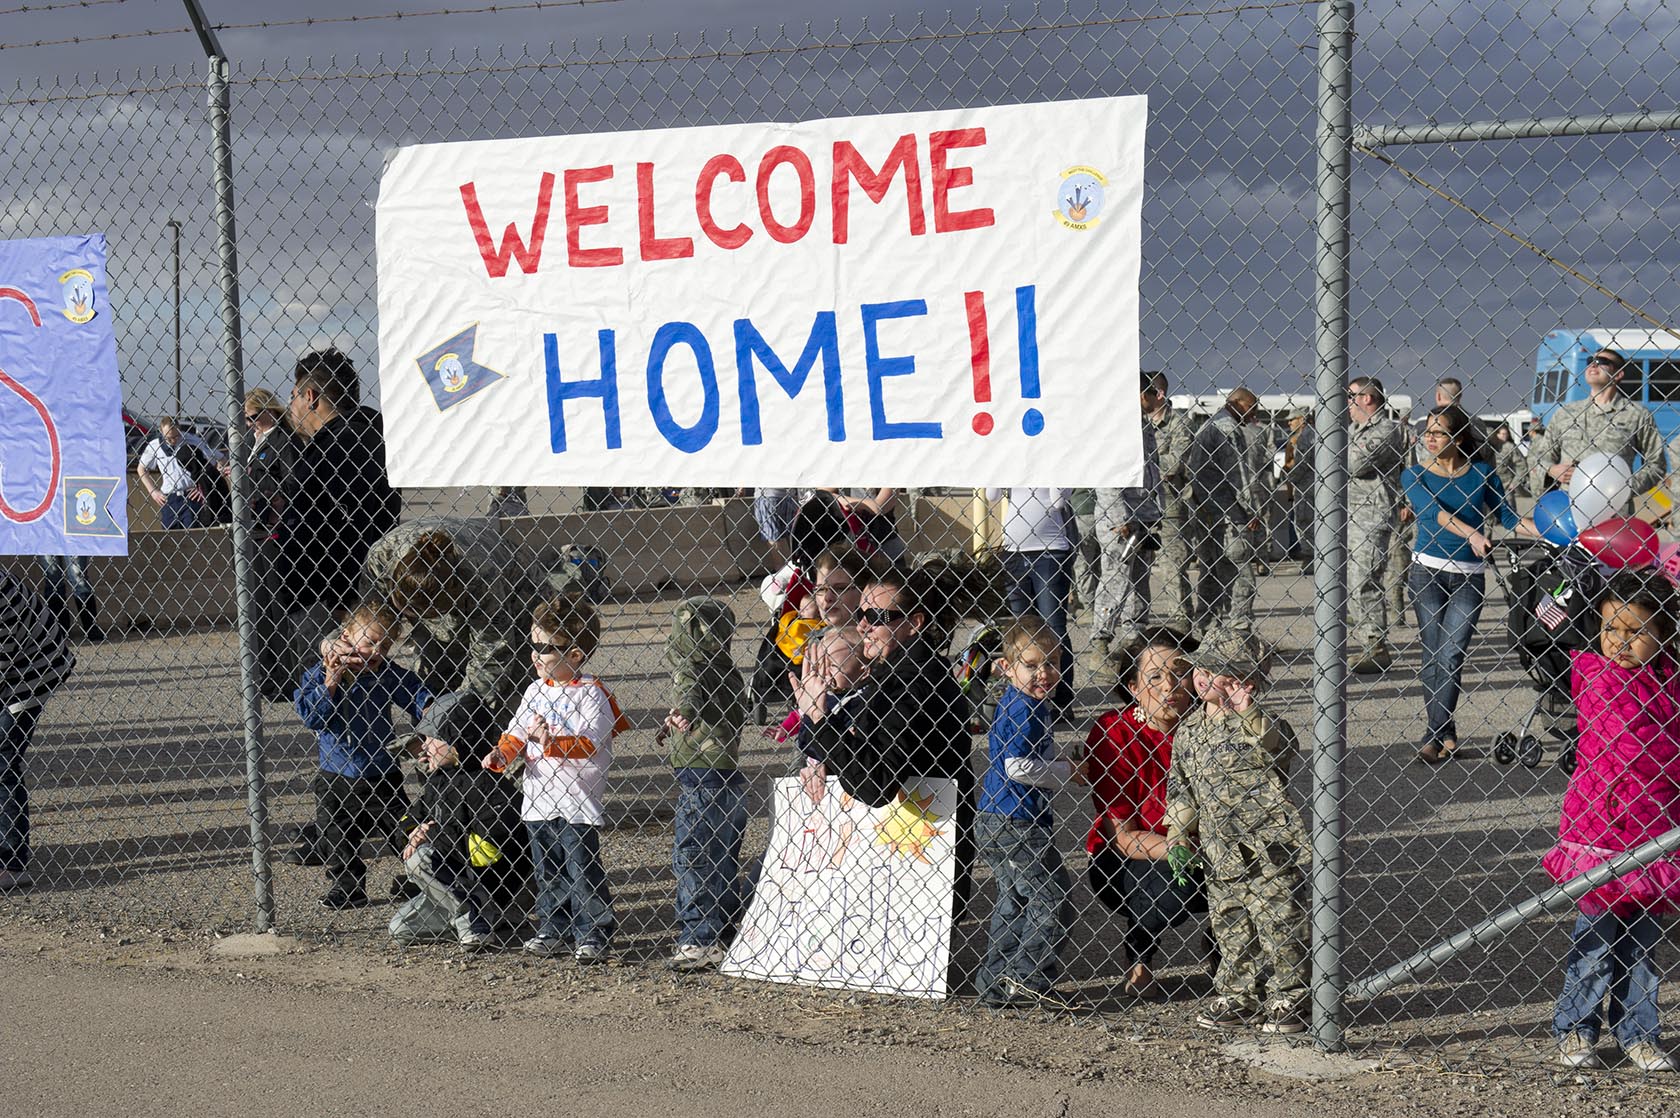 Friends and family await the return of around 200 airmen from the 7th Fighter Squadron and the 49th Maintenance Group on the Holloman Air Force Base, N.M. flightline, Jan. 28. F-22 Raptors and around 200 personnel returned Monday from a nine-month deployment to Southwest Asia ensuring regional security and joint tactical air operations. (U.S. Air Force photo by Airman 1st Class Michael Shoemaker/Released)